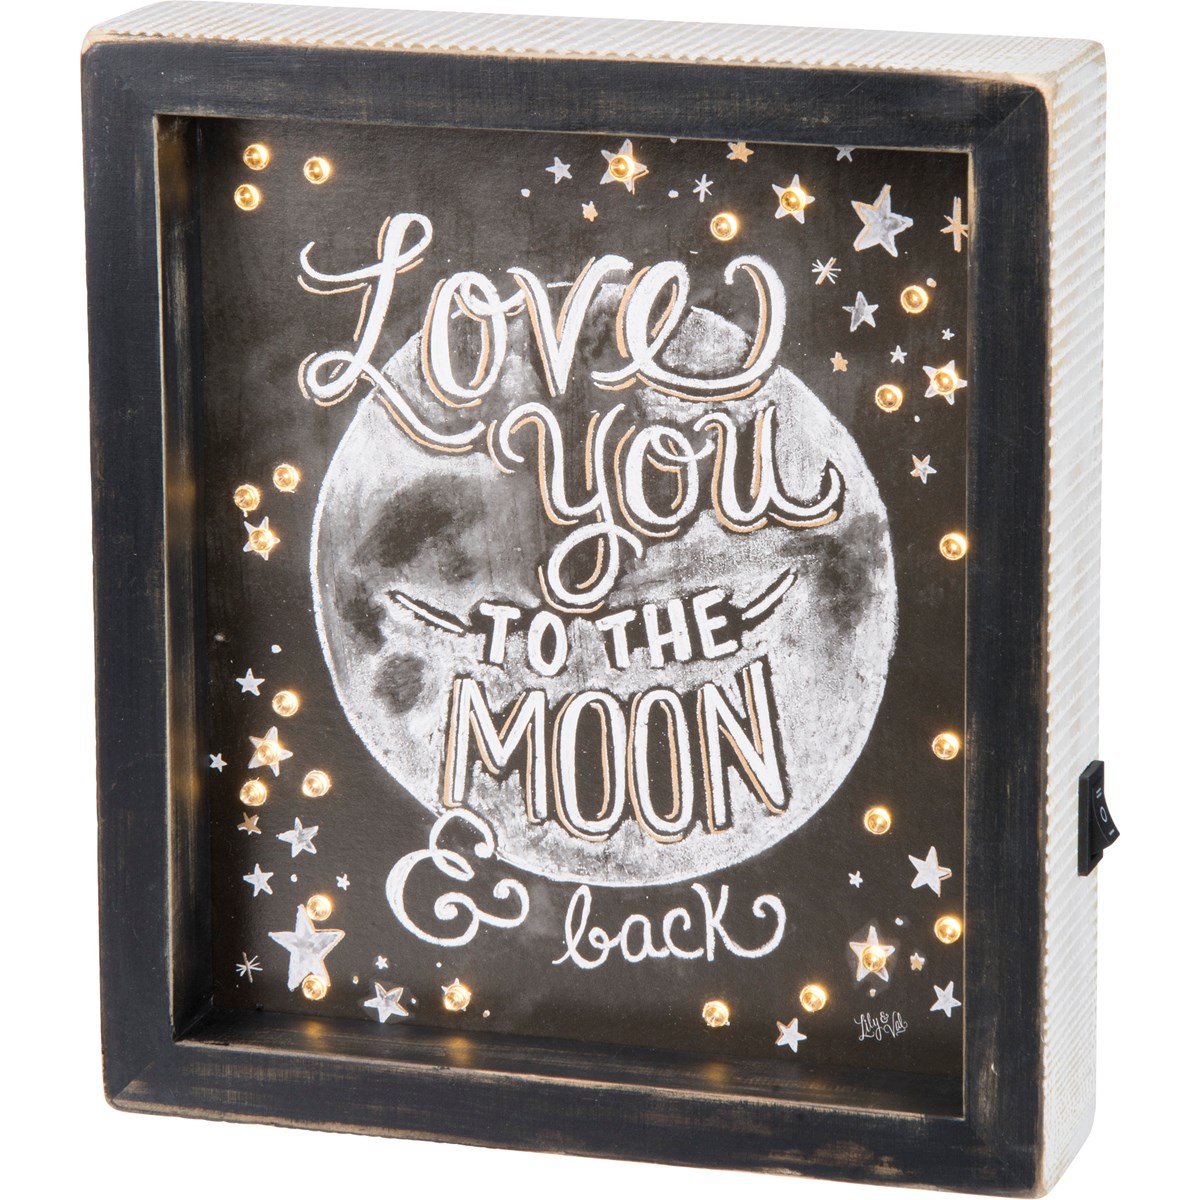 LED Chalk Sign - Love You To The Moon And Back - 8" x 9" x 1.75" - Wood, Paper, Lights